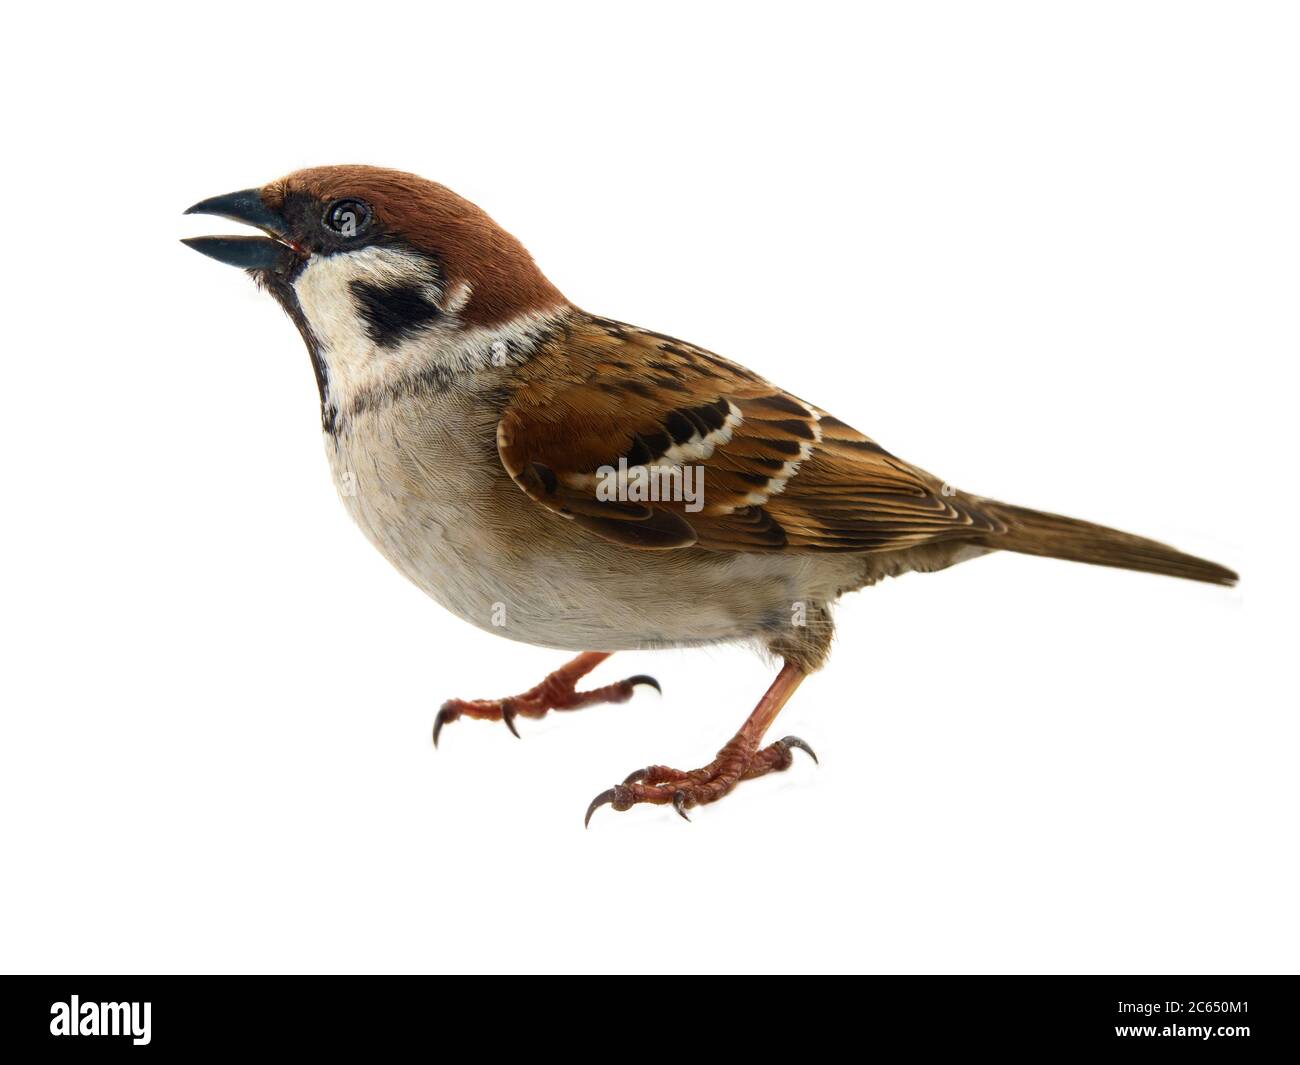 Sparrows as the most common birds in human environment. Eurasian tree sparrow (Passer montanus) in dynamics isolated on white background Stock Photo